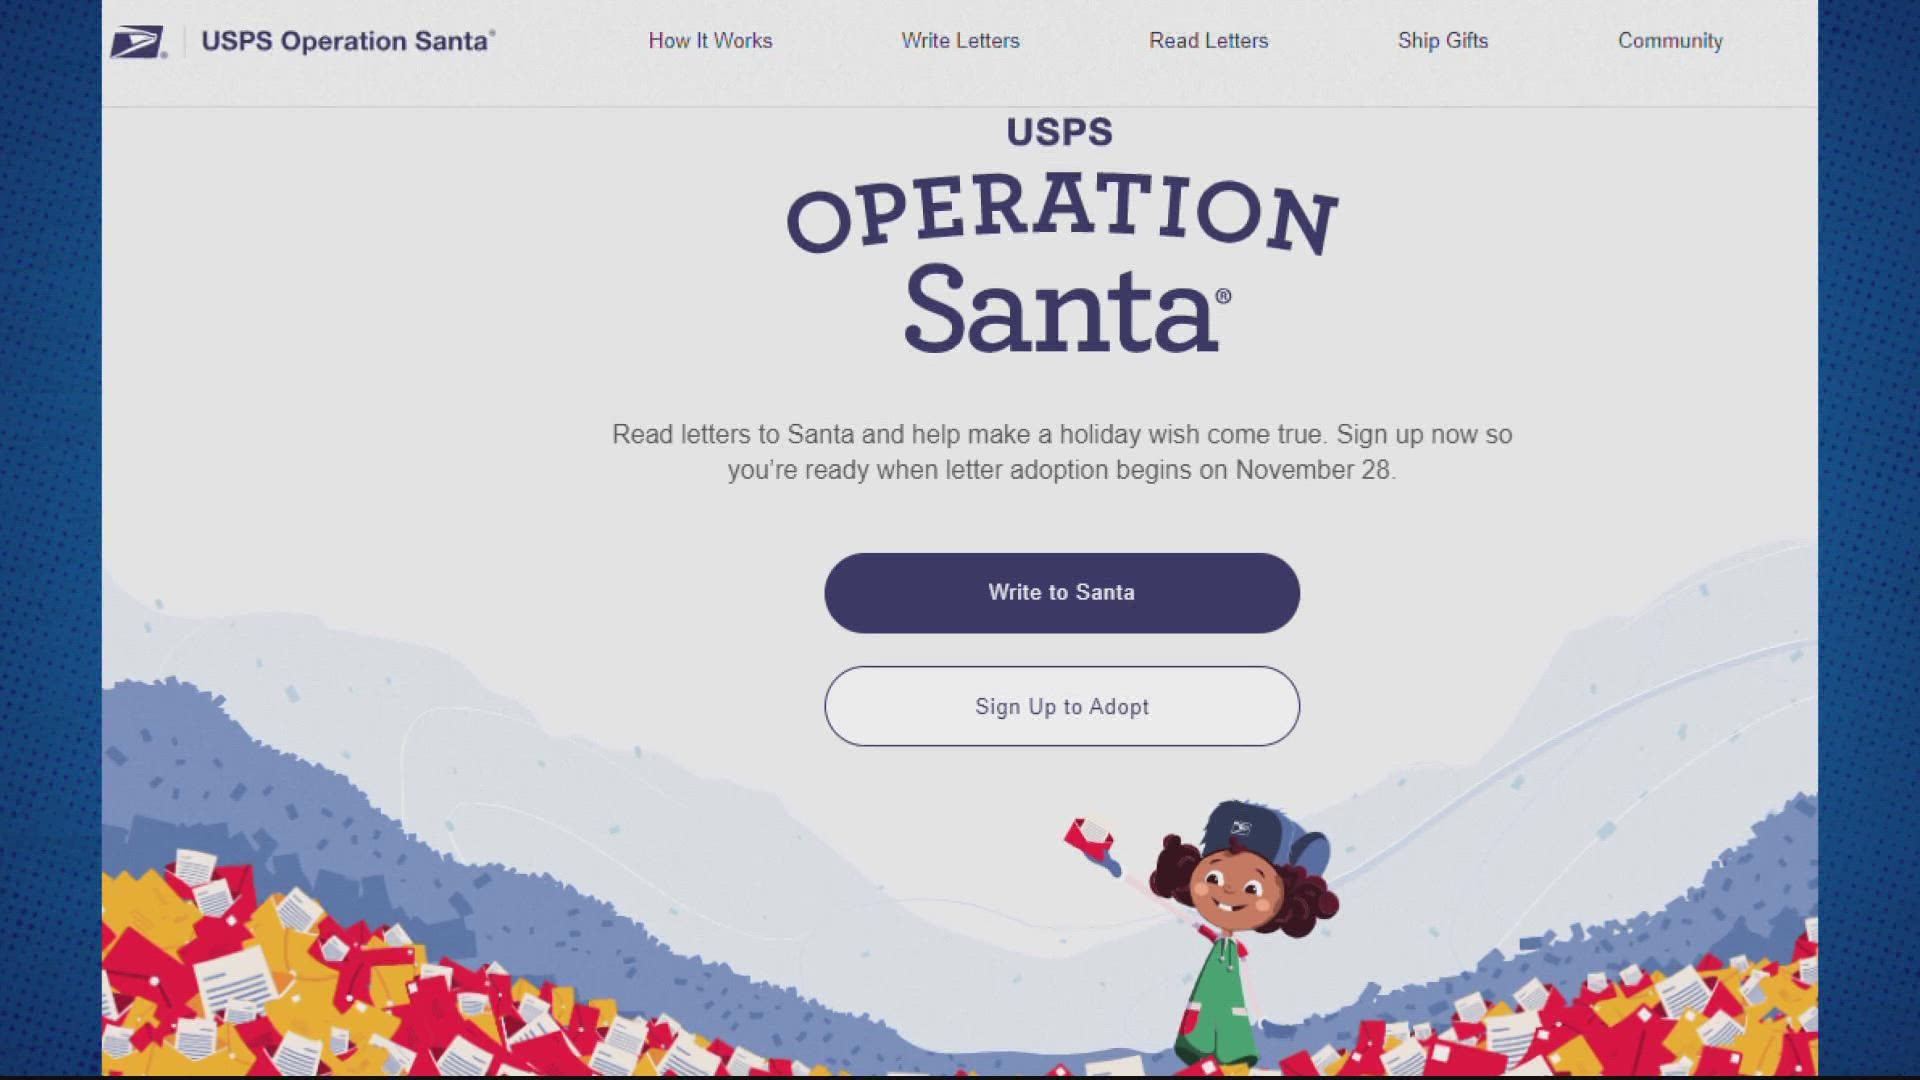 Here's how you can help answer letters to Santa.